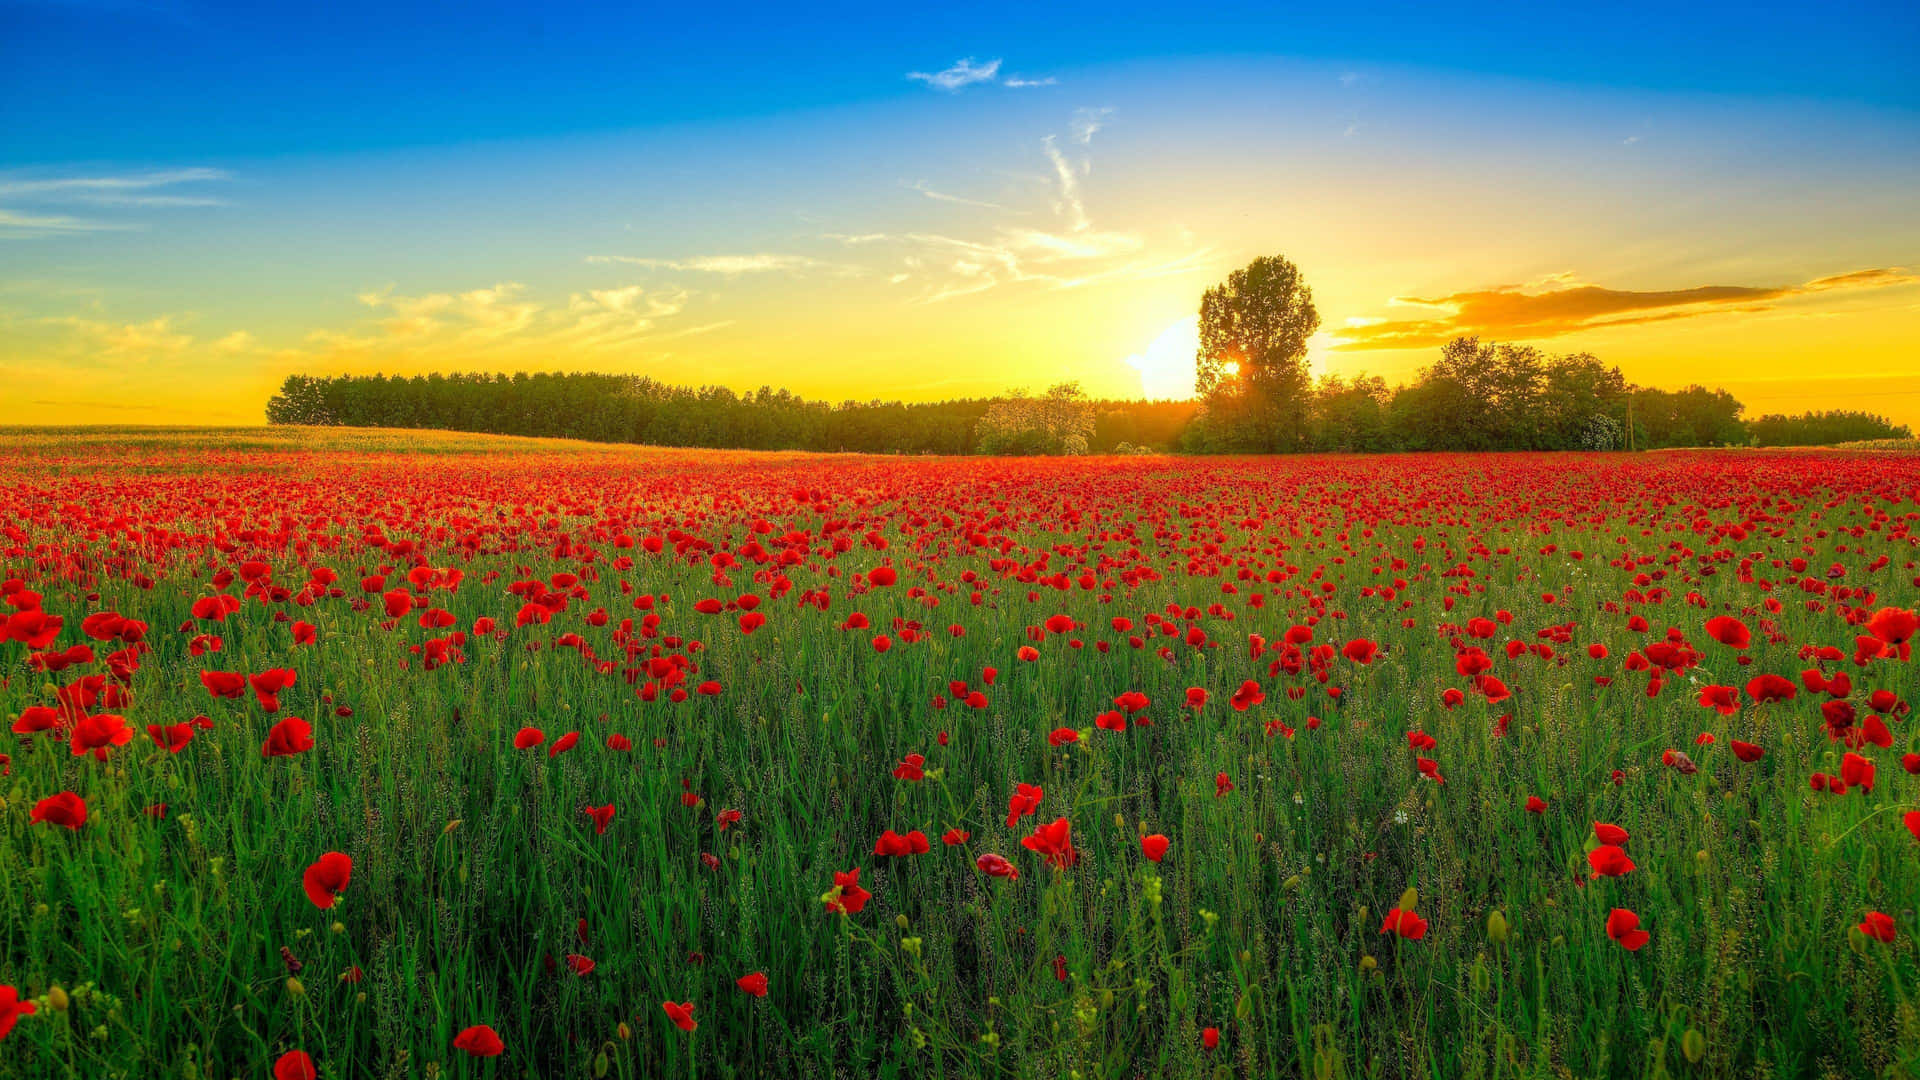 Red Poppies In The Field At Sunset